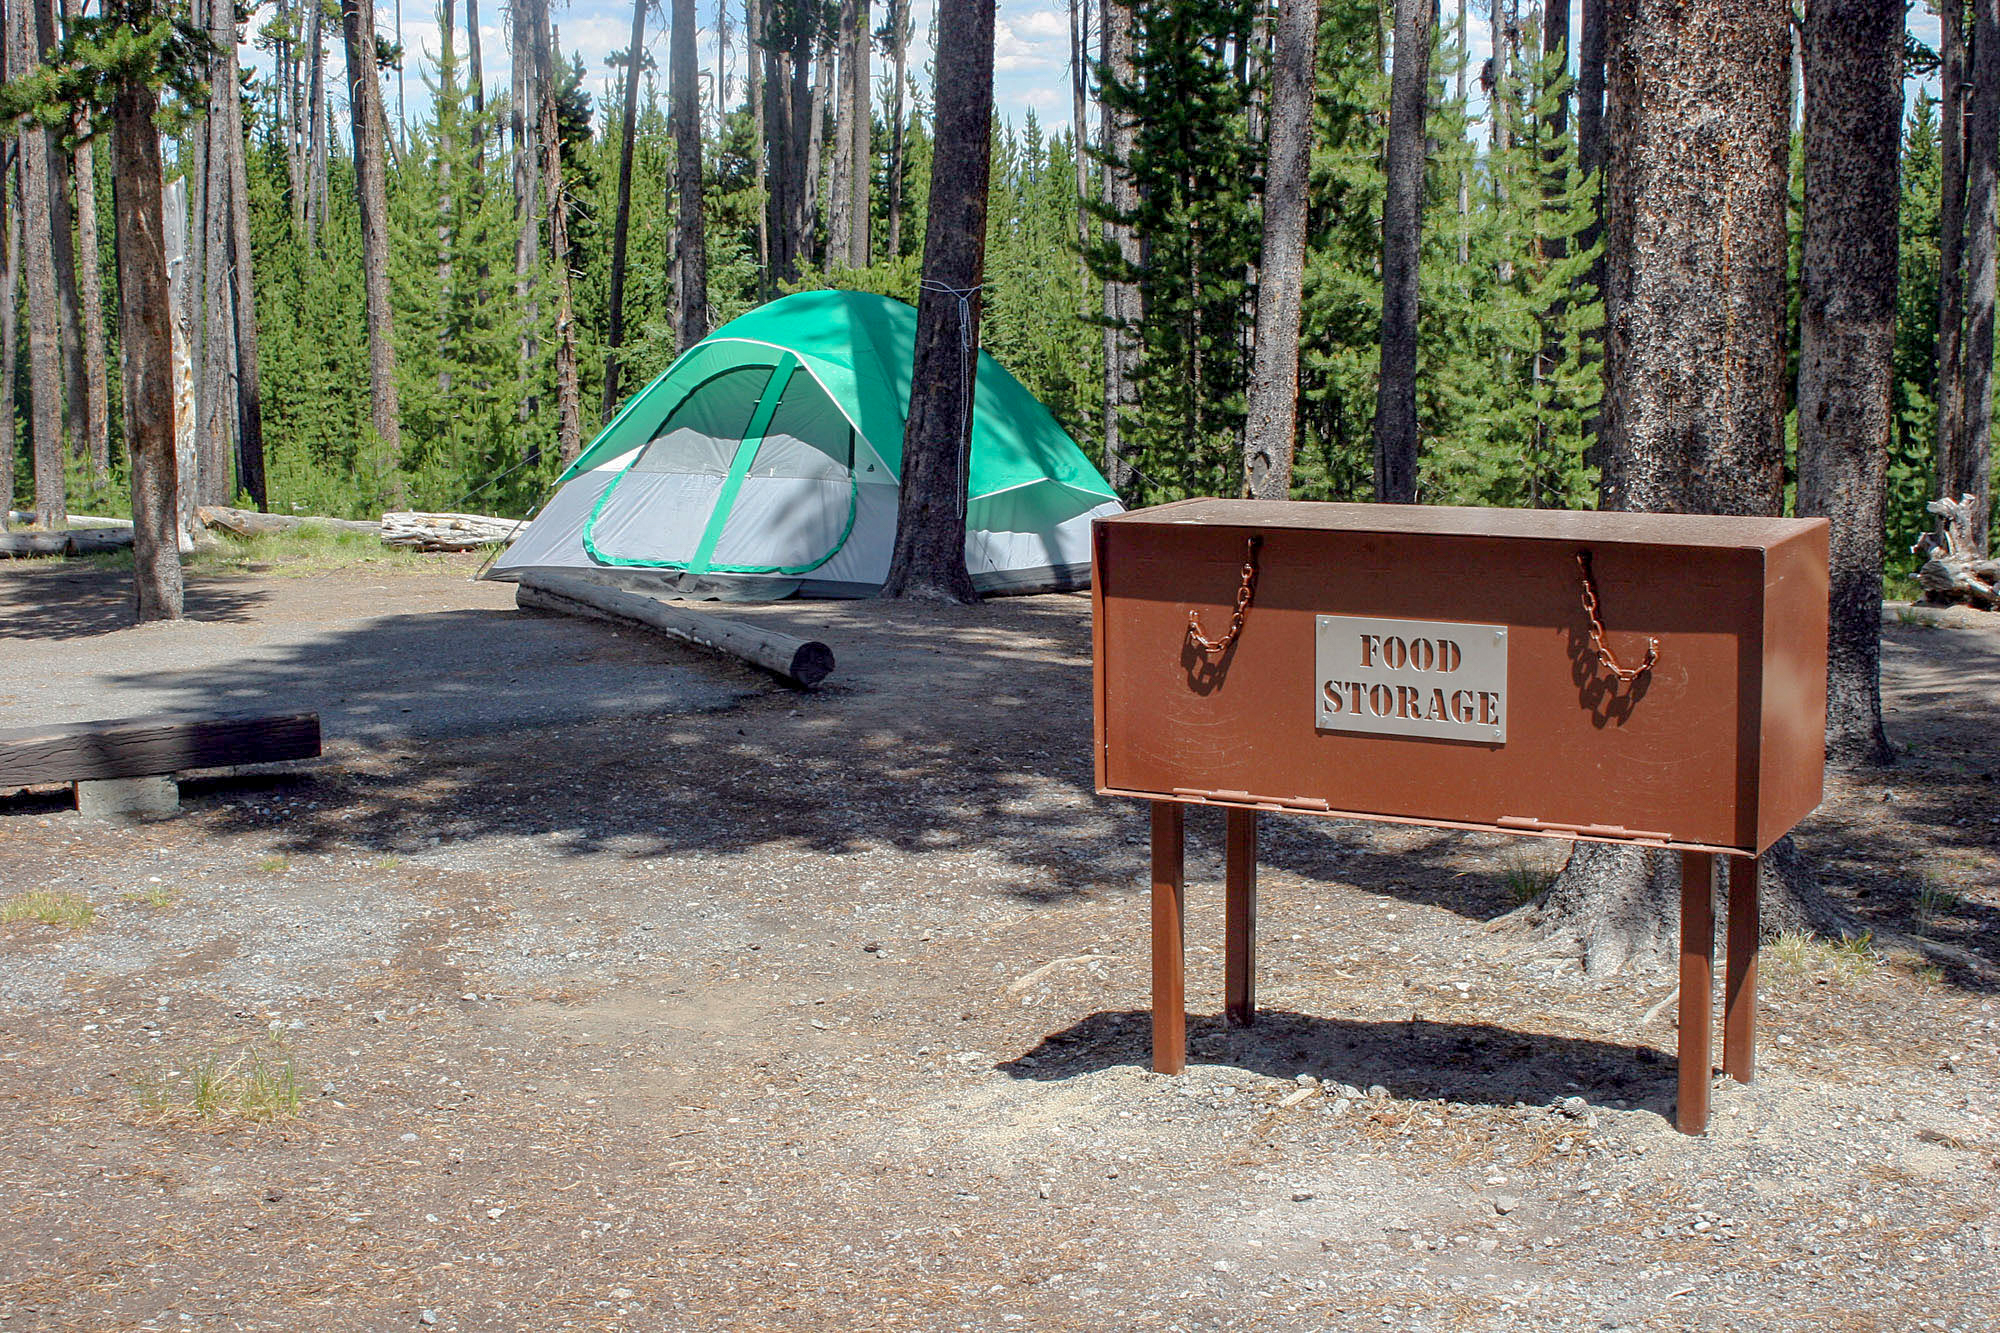 A green tent sits in capsite with a metal box in front of it labeled, "Food Storage."